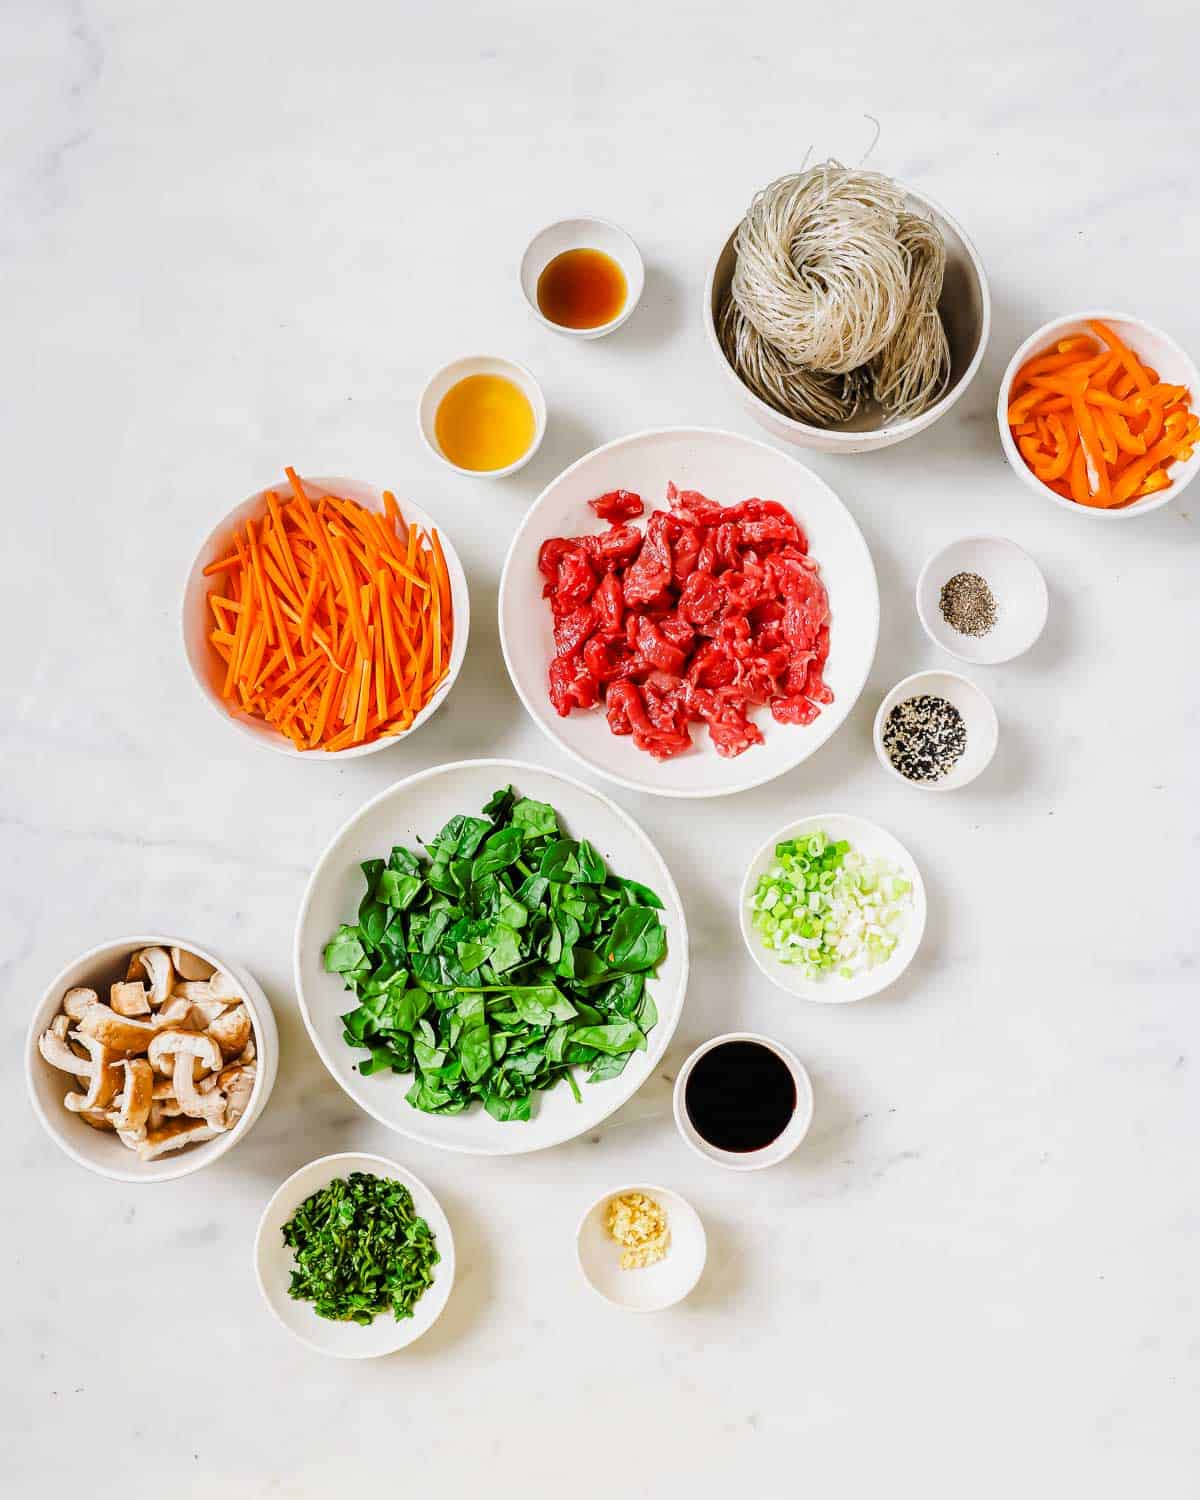 Ingredients in bowls to make sweet potato glass noodles.